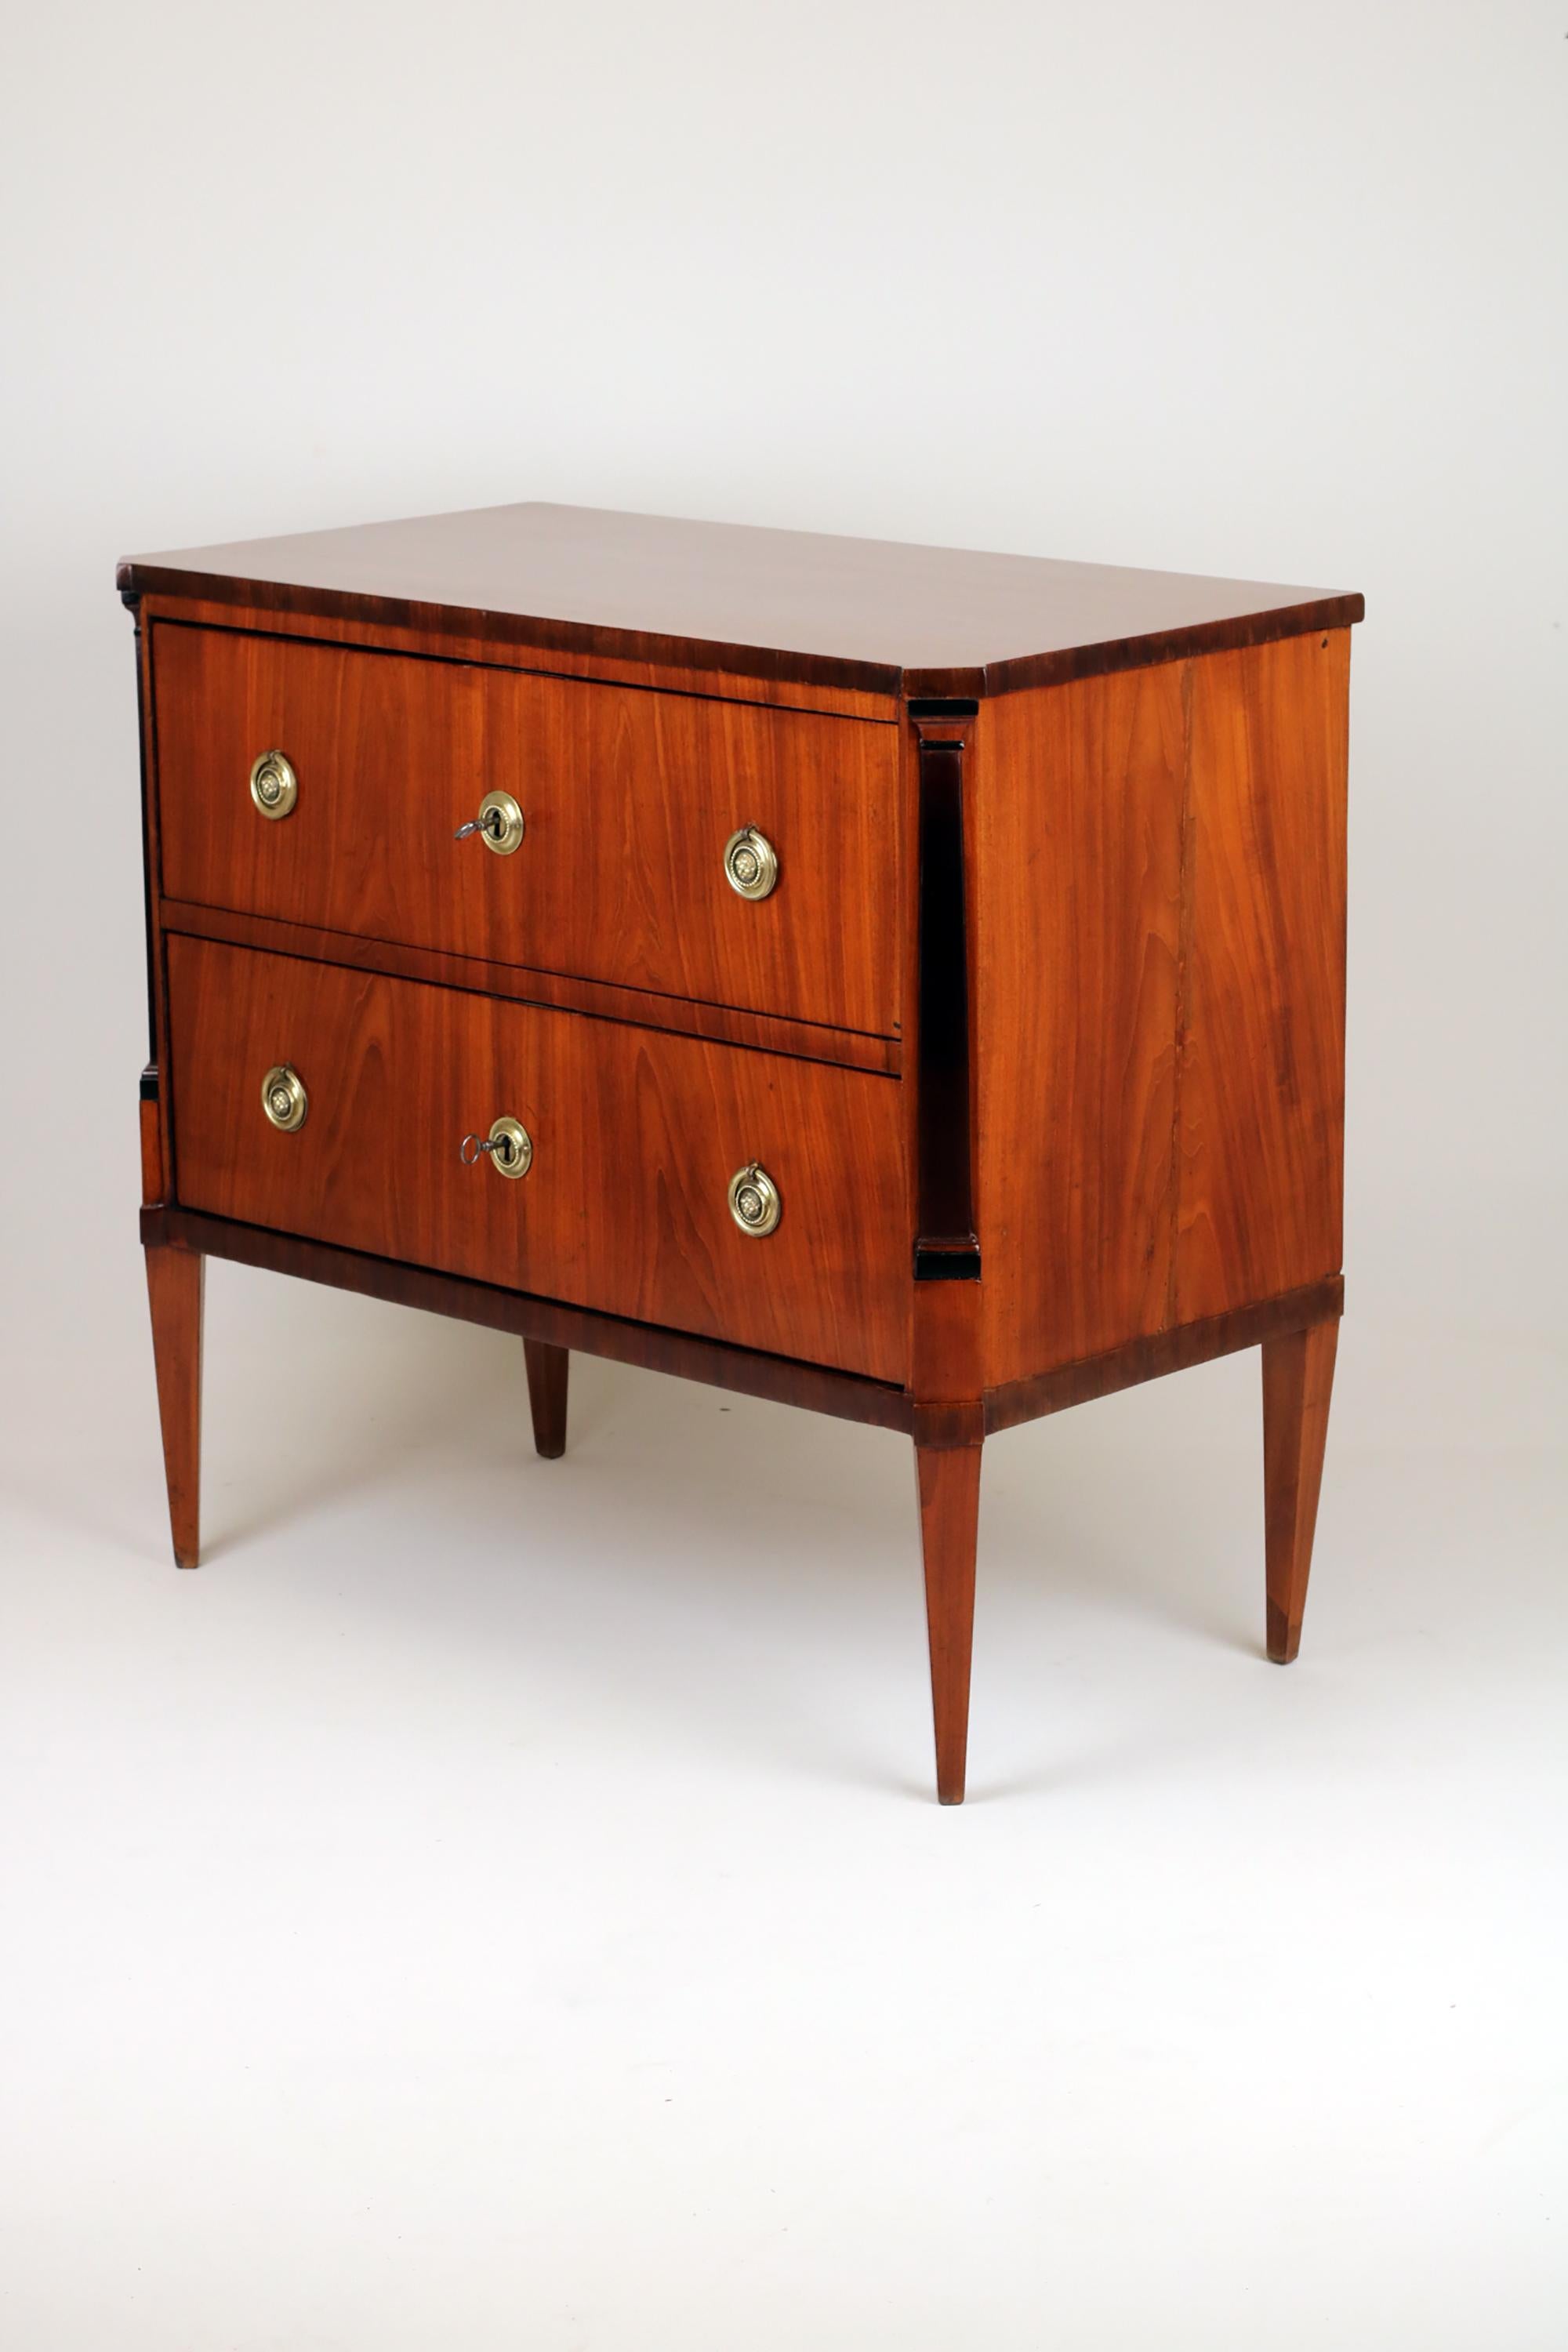 Early 19th Century Louis XVI small Chest of Drawers